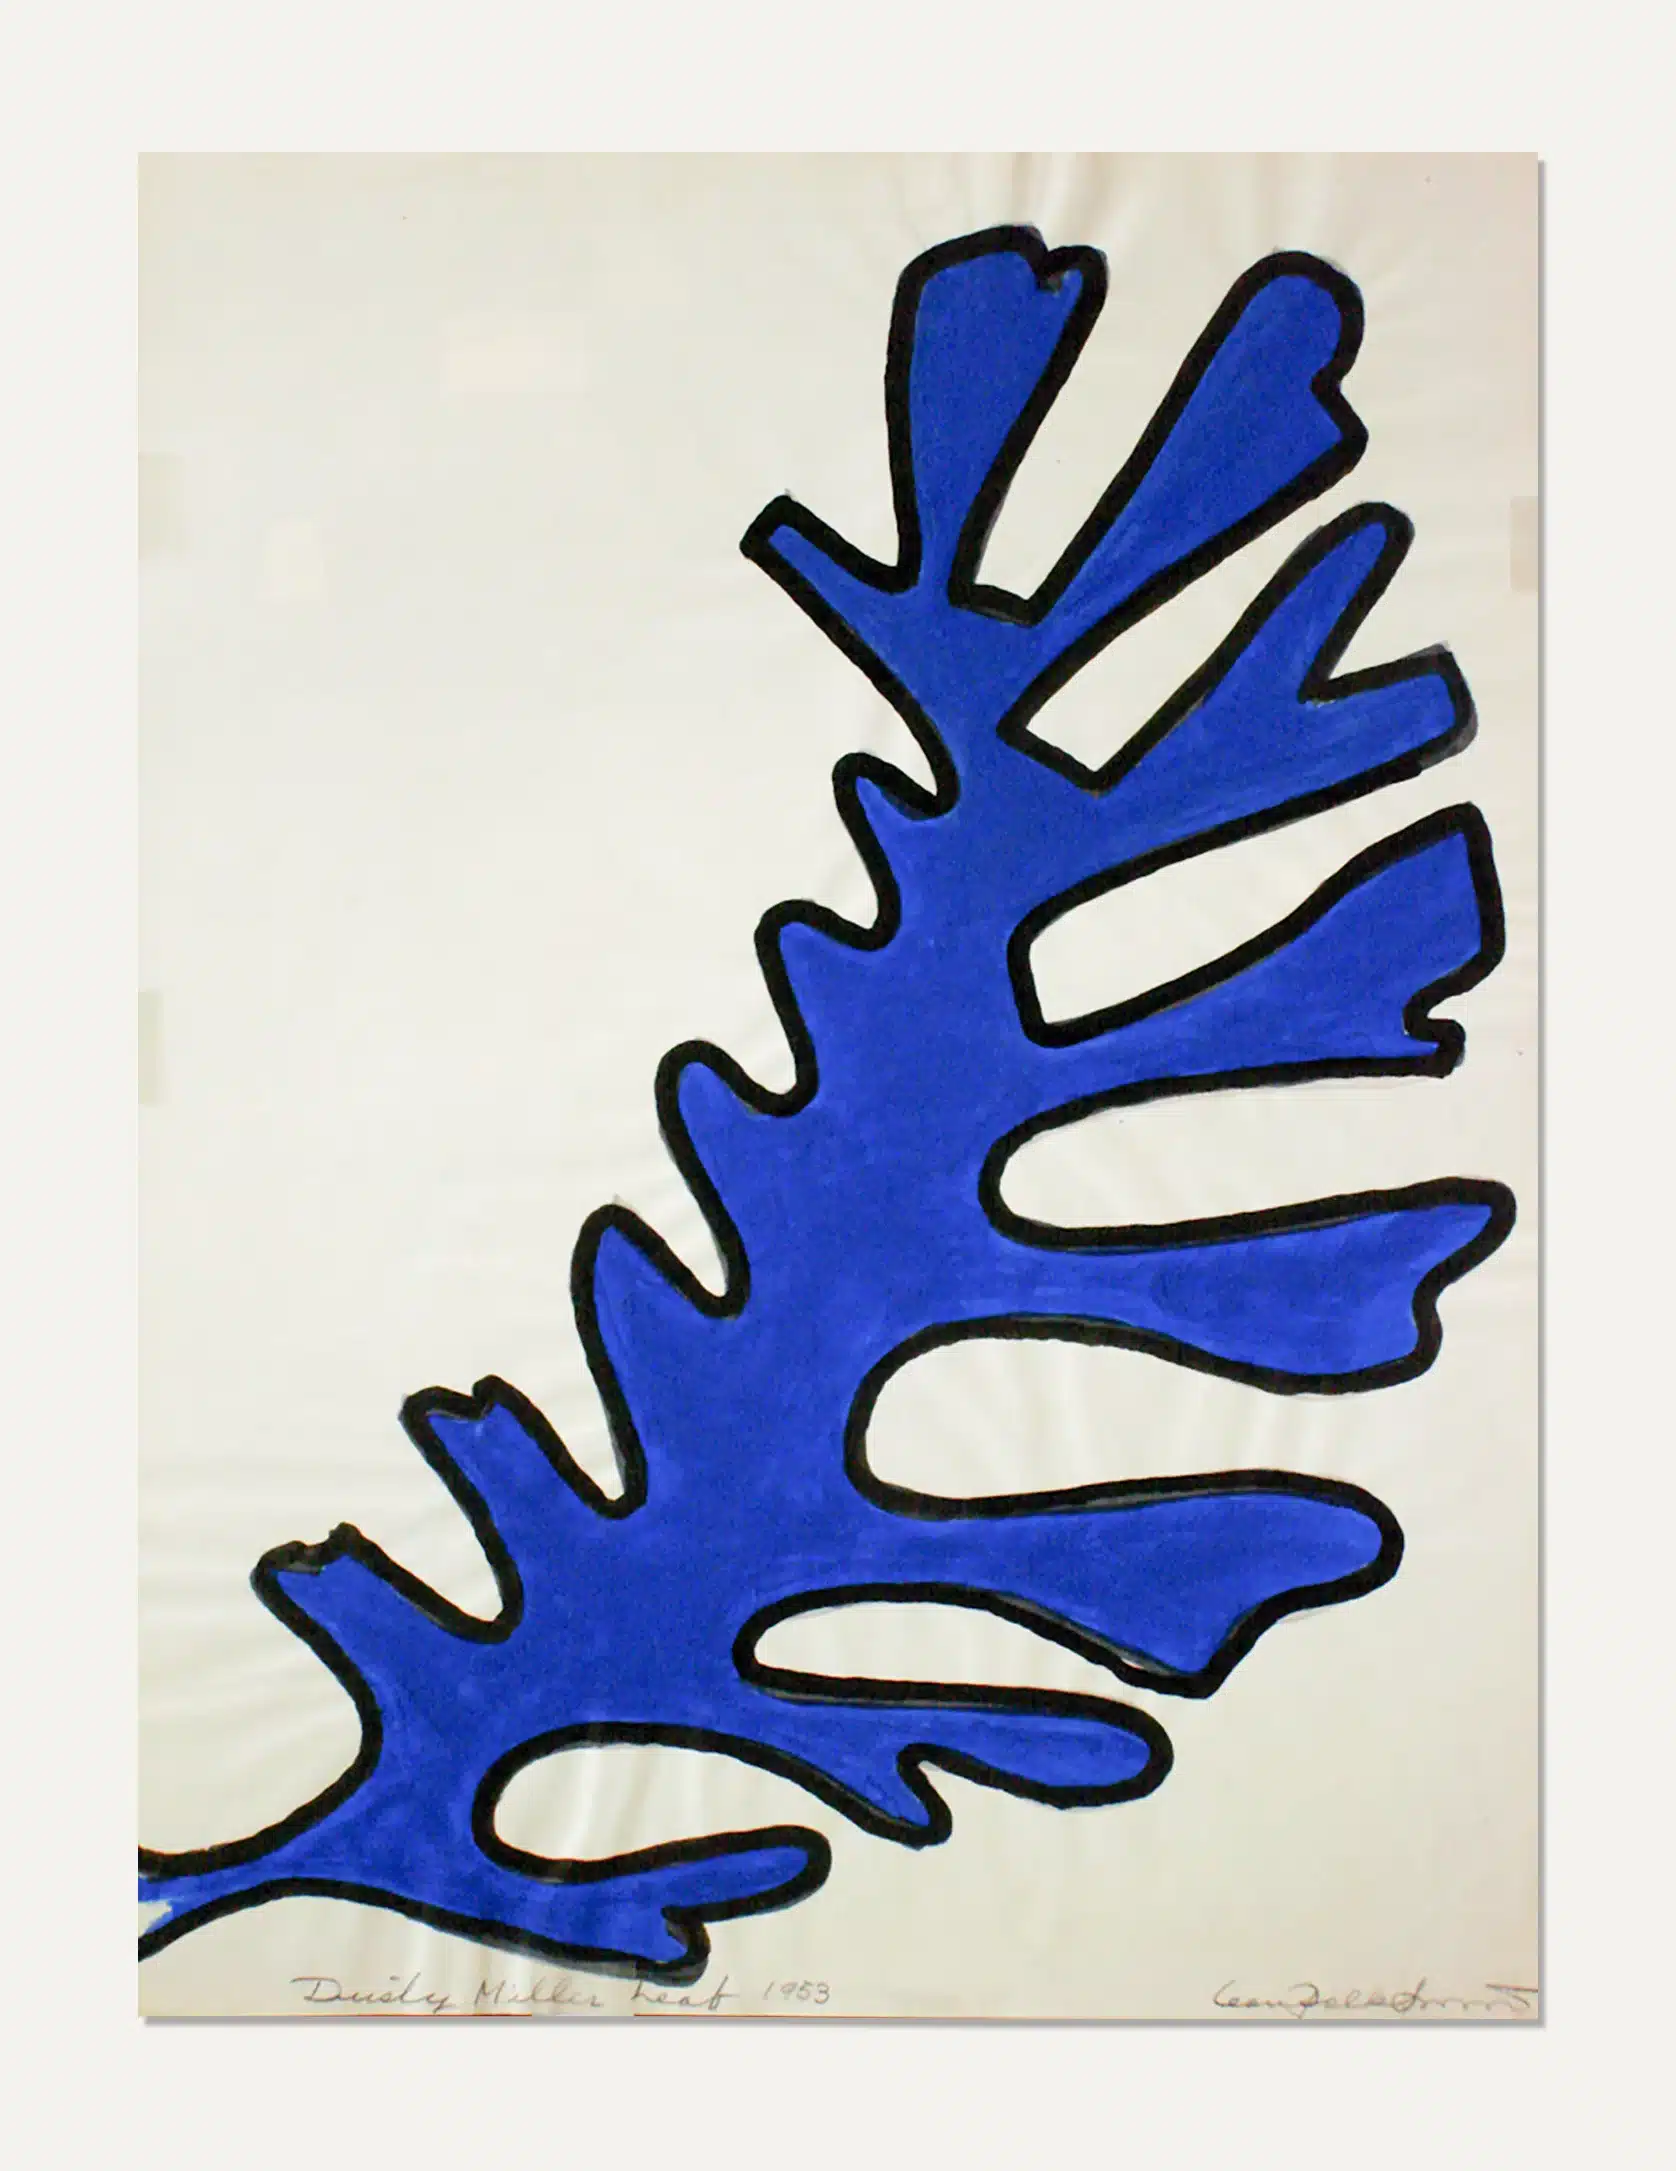 Dusty Miller Leaf 1953, 1953. Paint (may be tempera) on paper (watermarked - "mead Dupi t"), sheet size: 18 x 14 in.